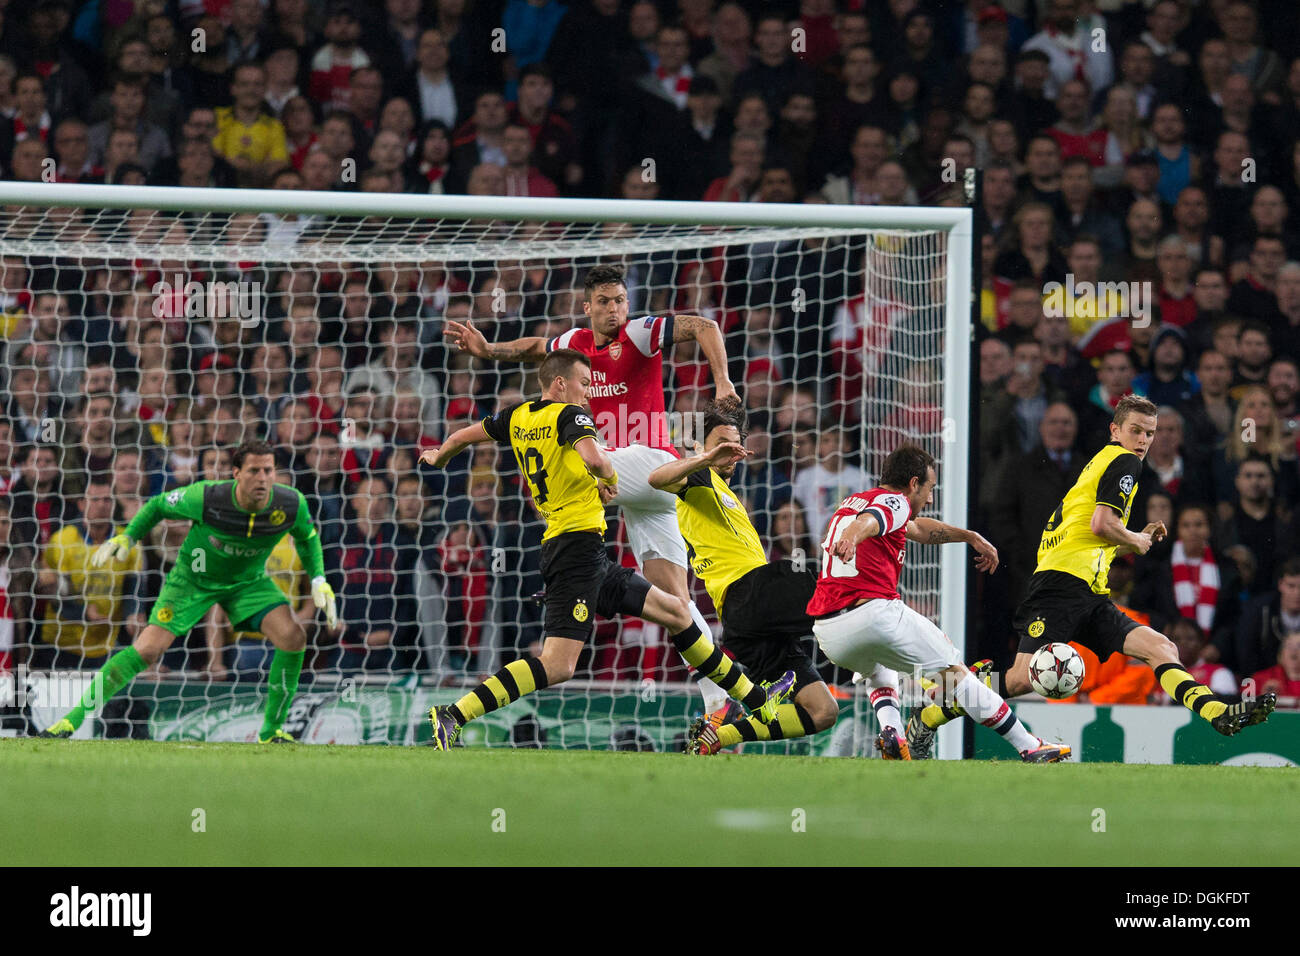 London, UK. 22nd Oct, 2013. Arsenal midfielder Santi CAZORLA gets a shot away under pressure during the Champions League game between Arsenal and Borussia Dortmund from the Emirates Stadium. © Action Plus Sports/Alamy Live News Stock Photo